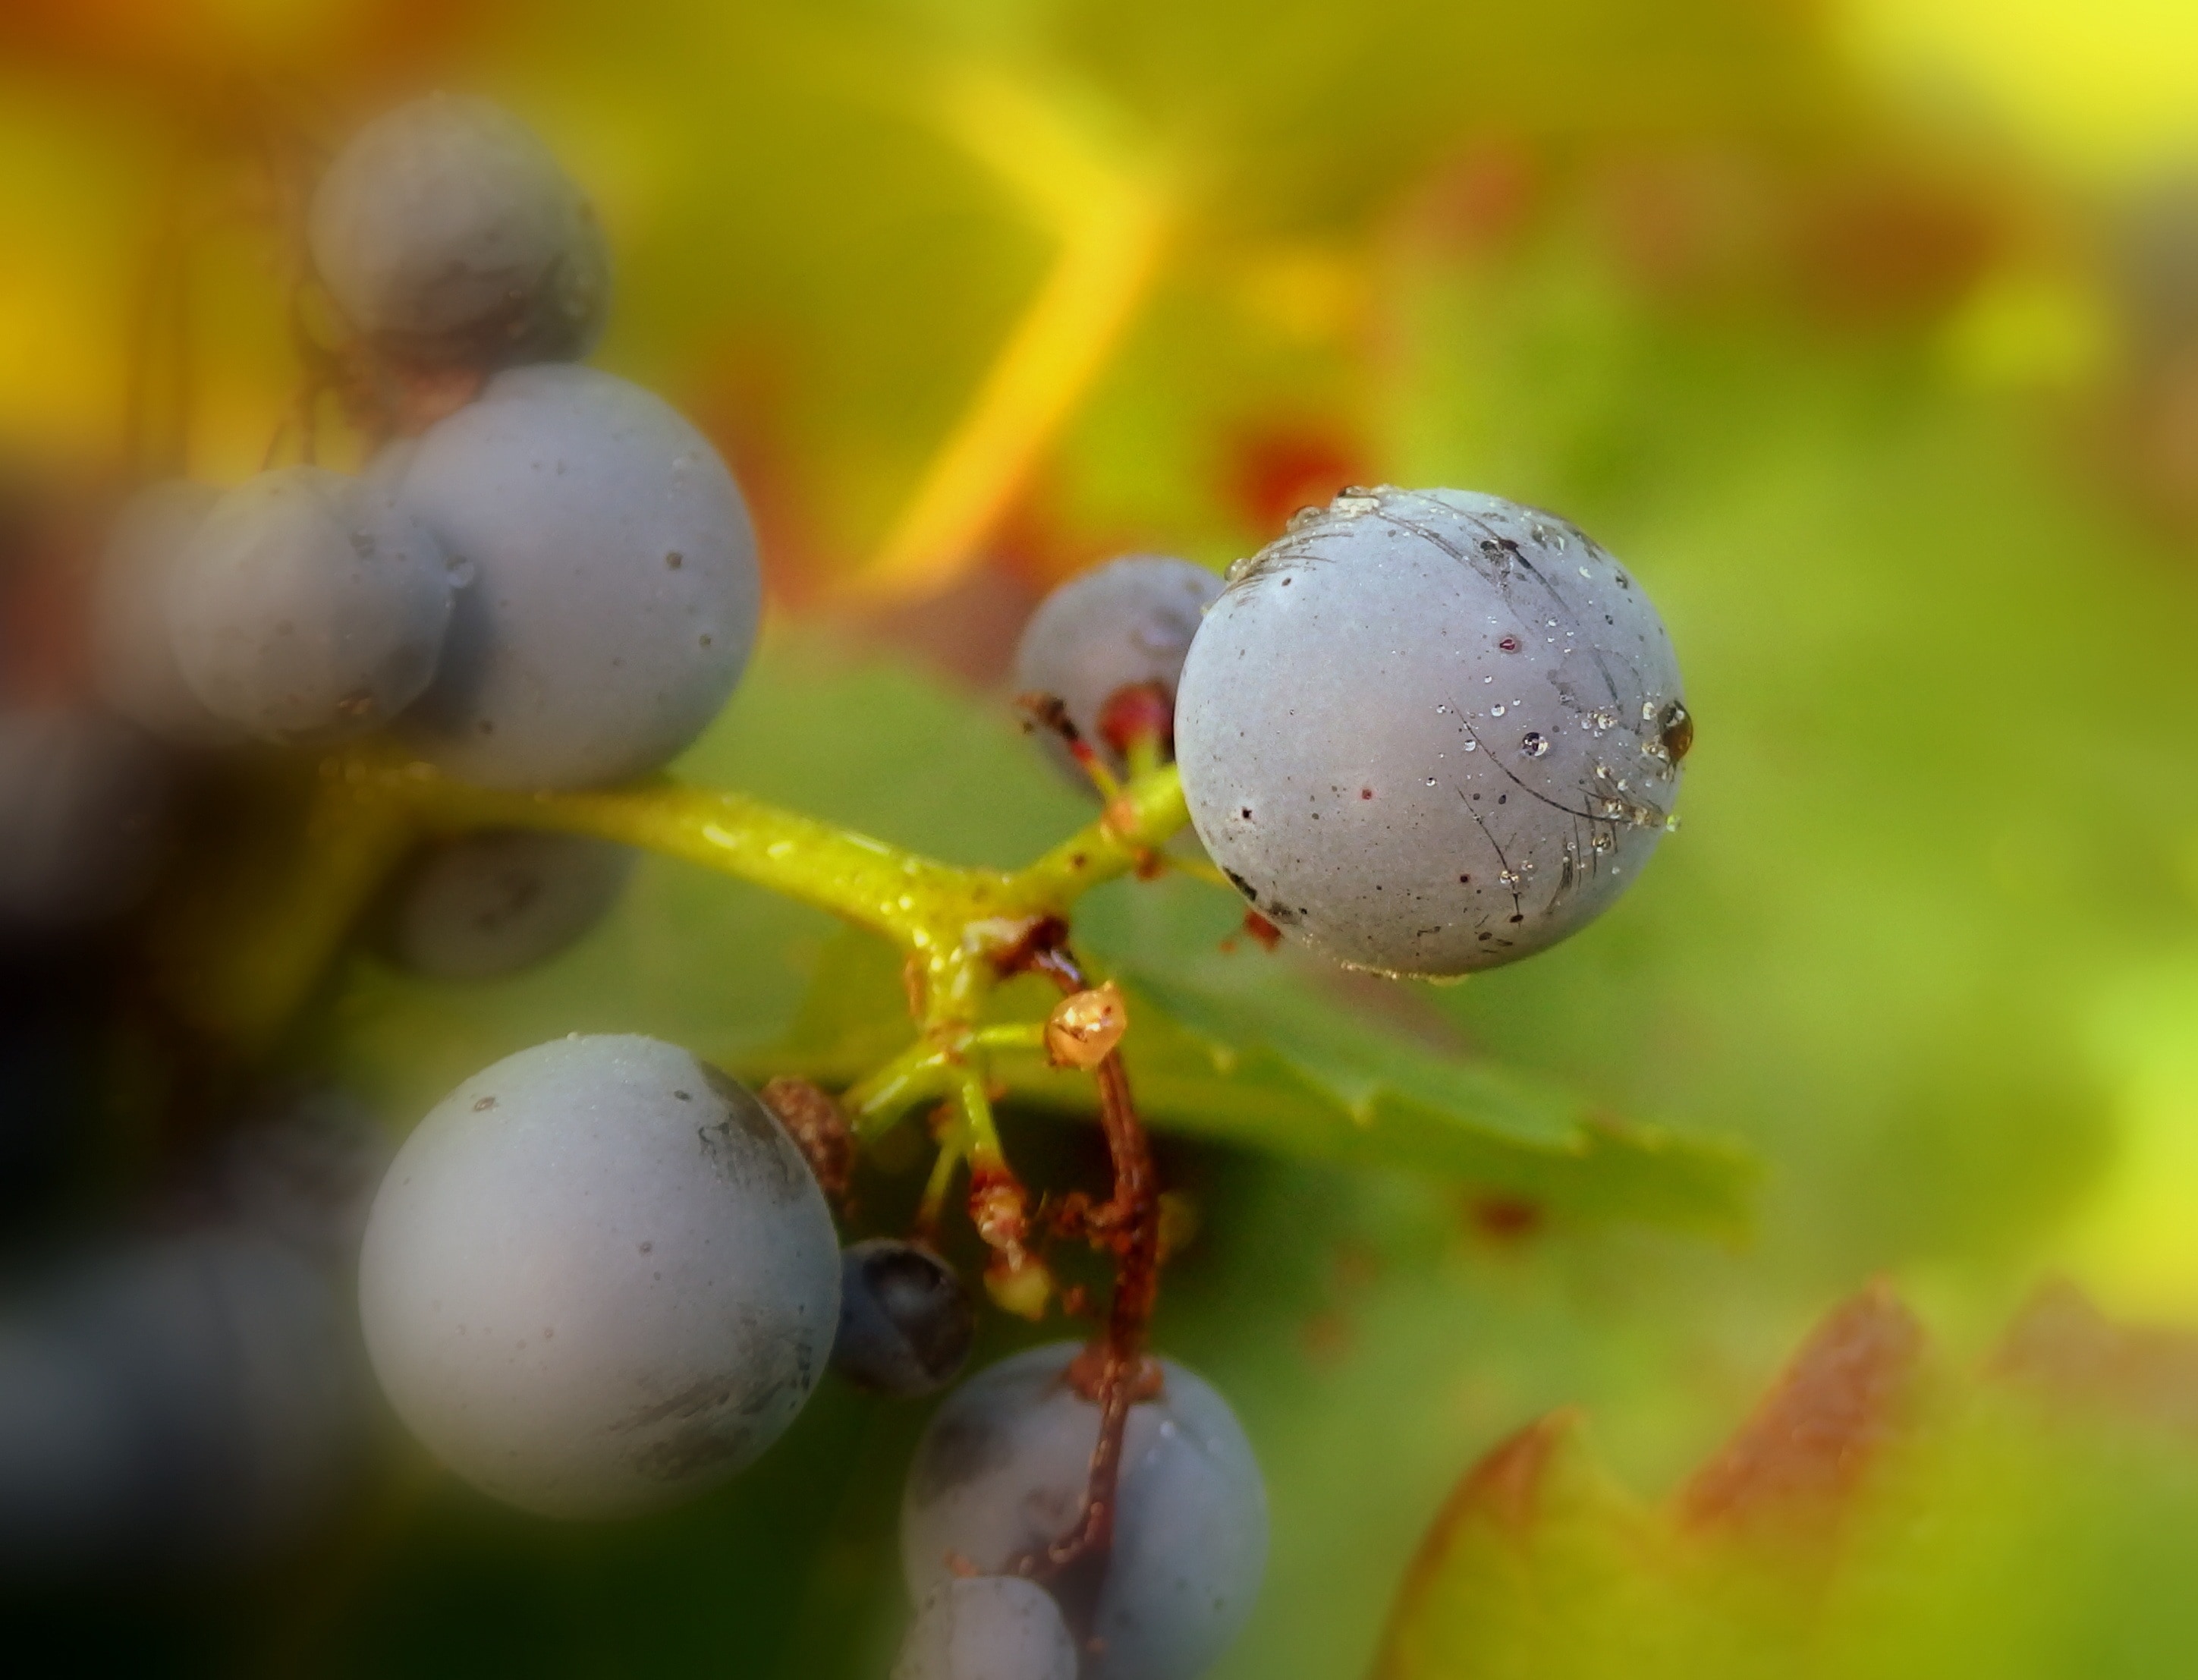 shallow focus photography of round purple fruits